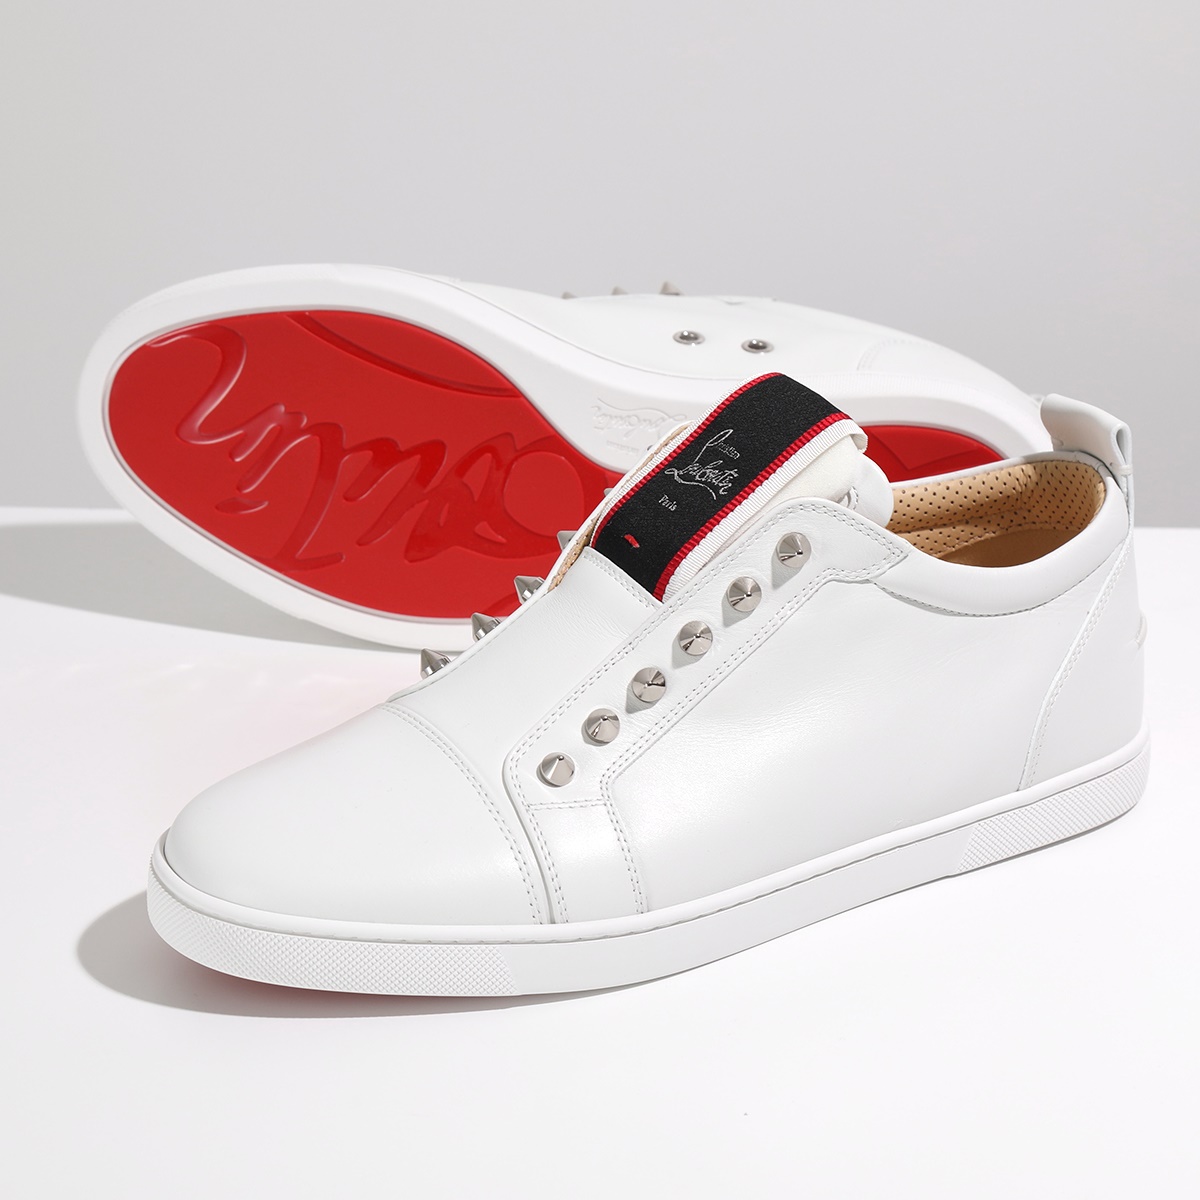 Christian Louboutin クリスチャンルブタン スニーカー F.A.V Fique A Vontade 3200465 メンズ レザー スタッズ装飾 スリッポンロゴ 靴 カラー2色｜s-musee｜02